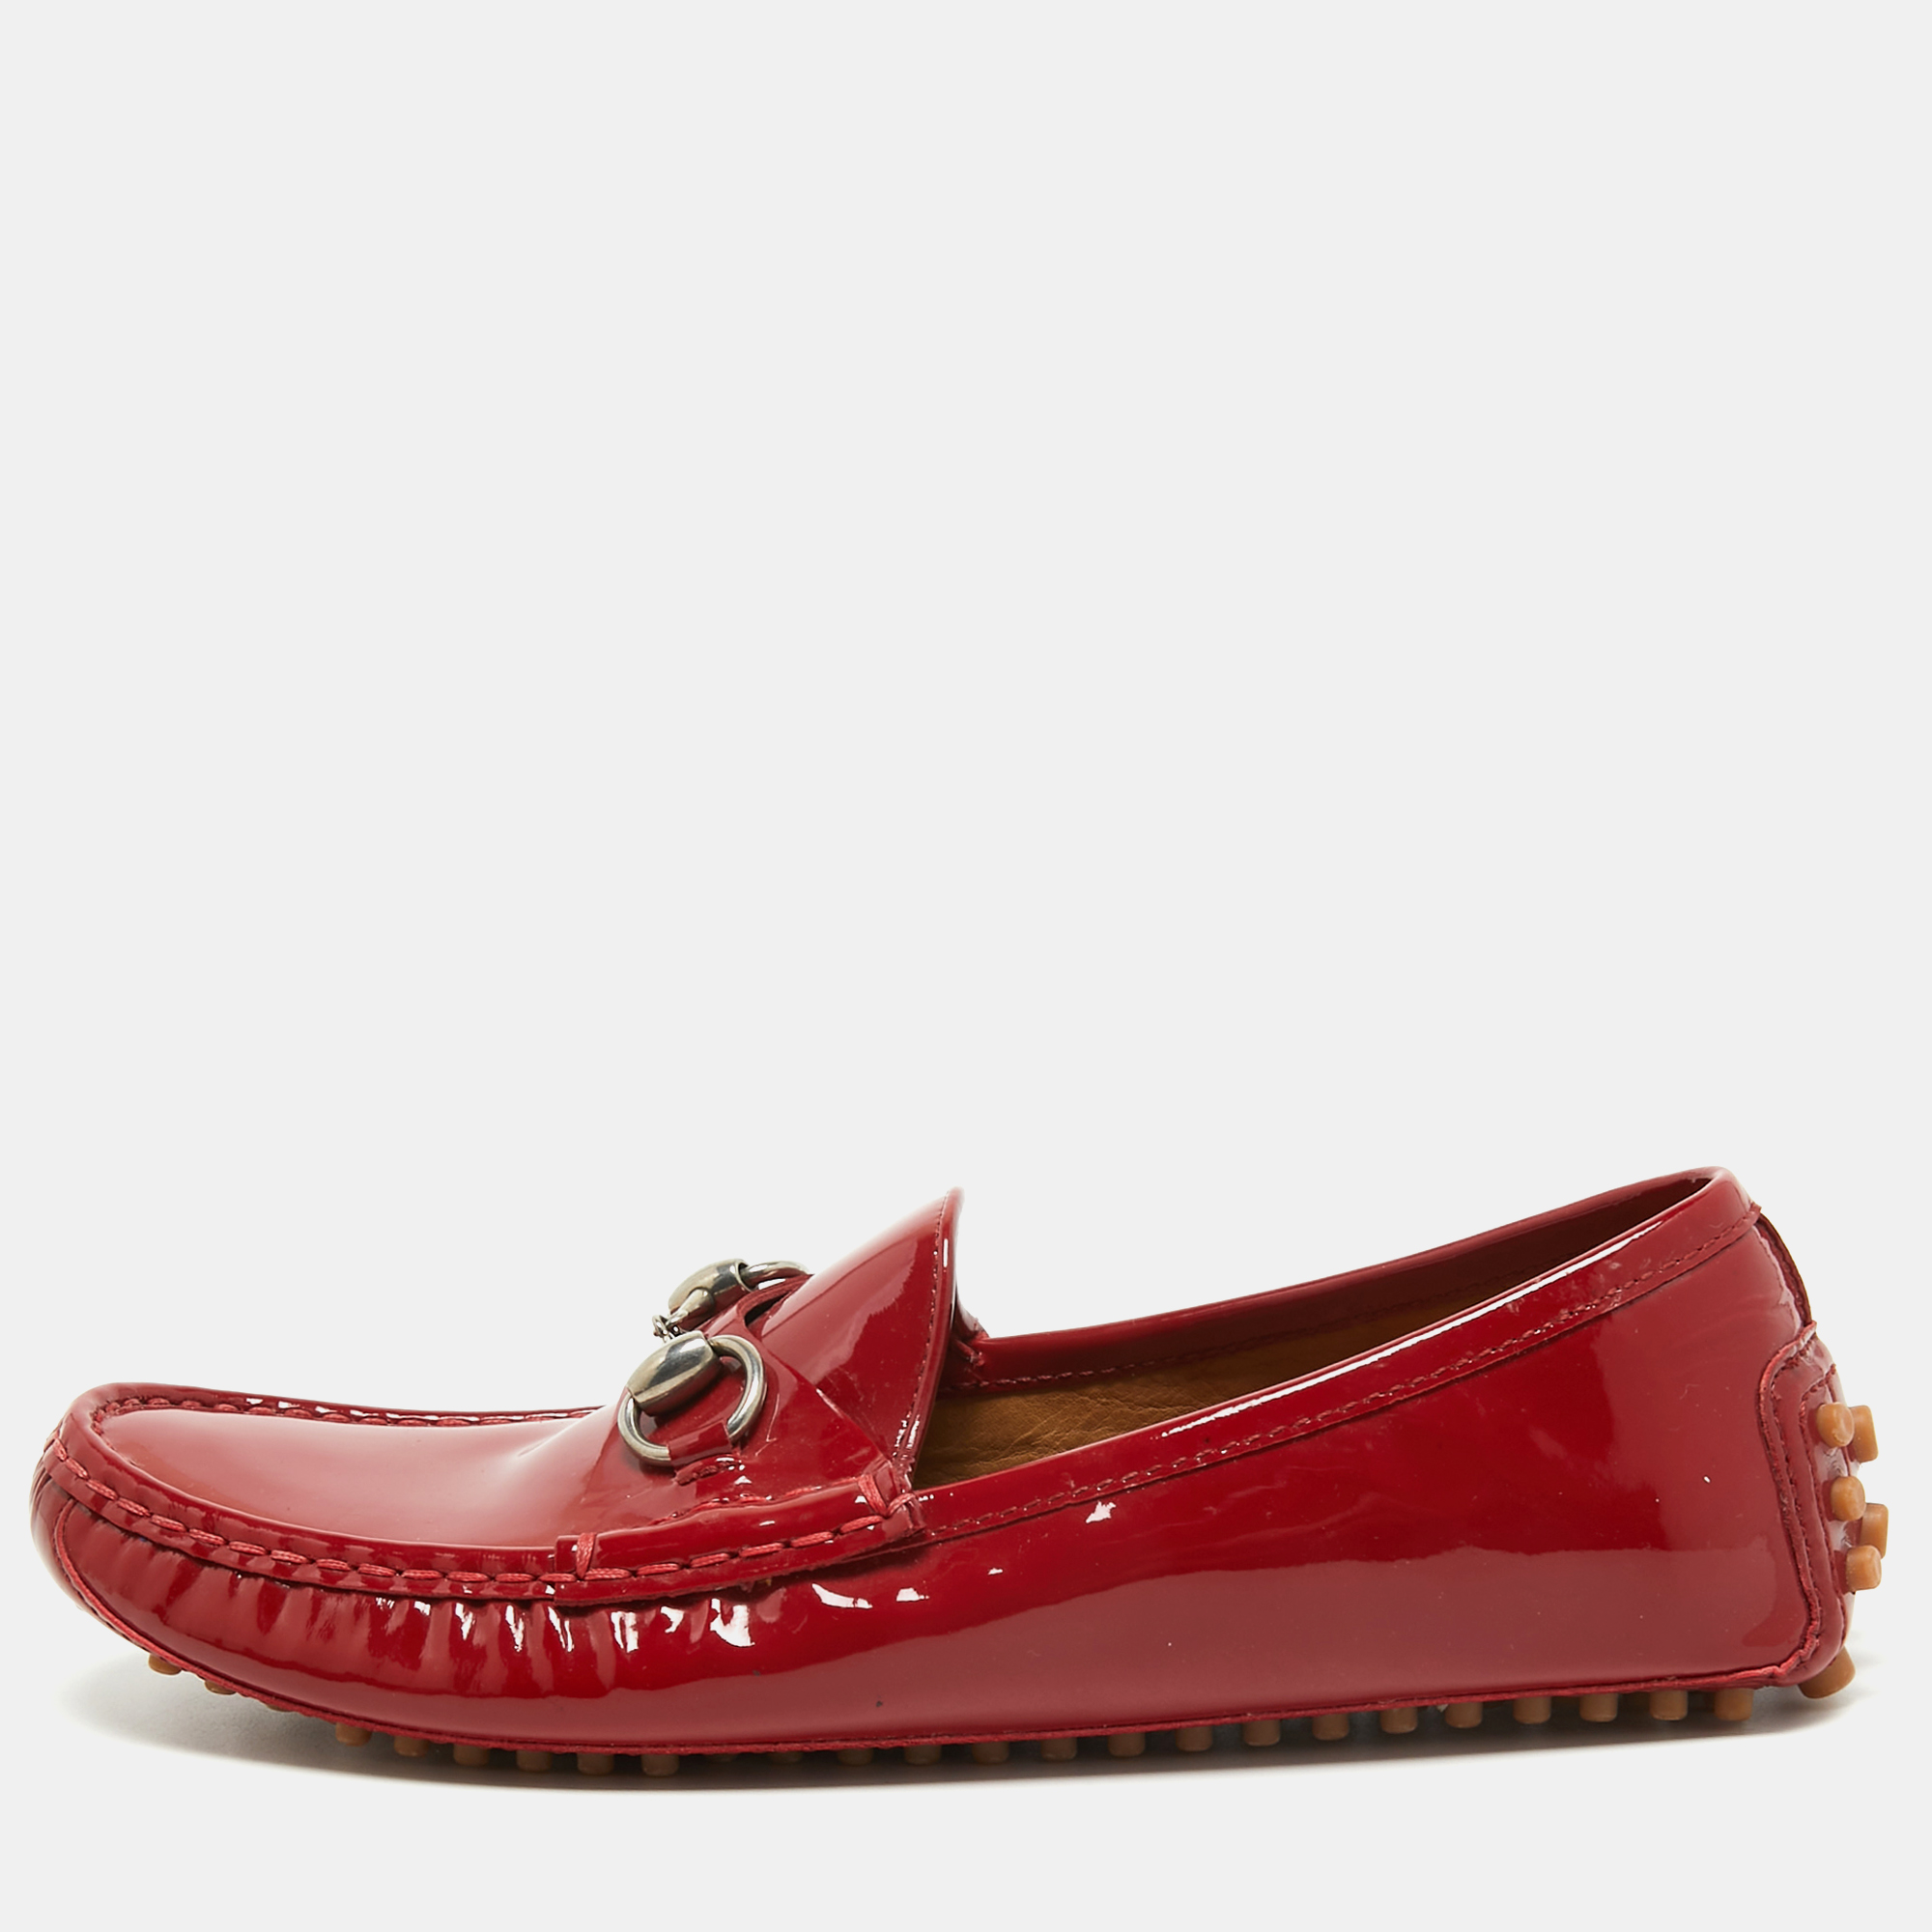 Pre-owned Gucci Red Patent Leather Horsebit Slip On Loafers Size 38